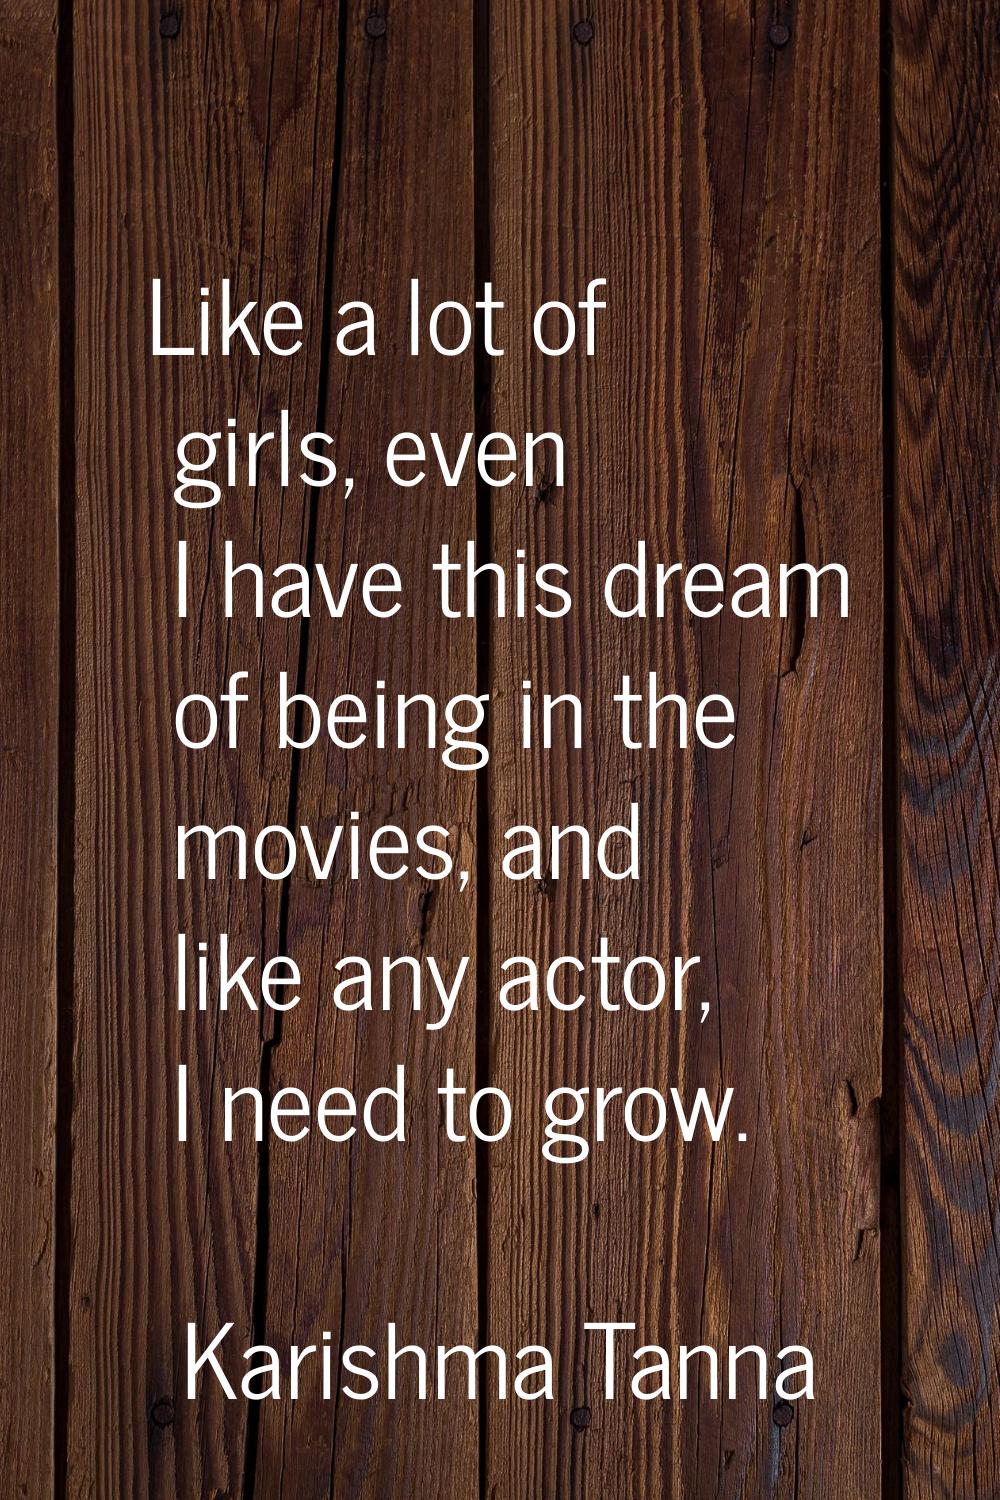 Like a lot of girls, even I have this dream of being in the movies, and like any actor, I need to g